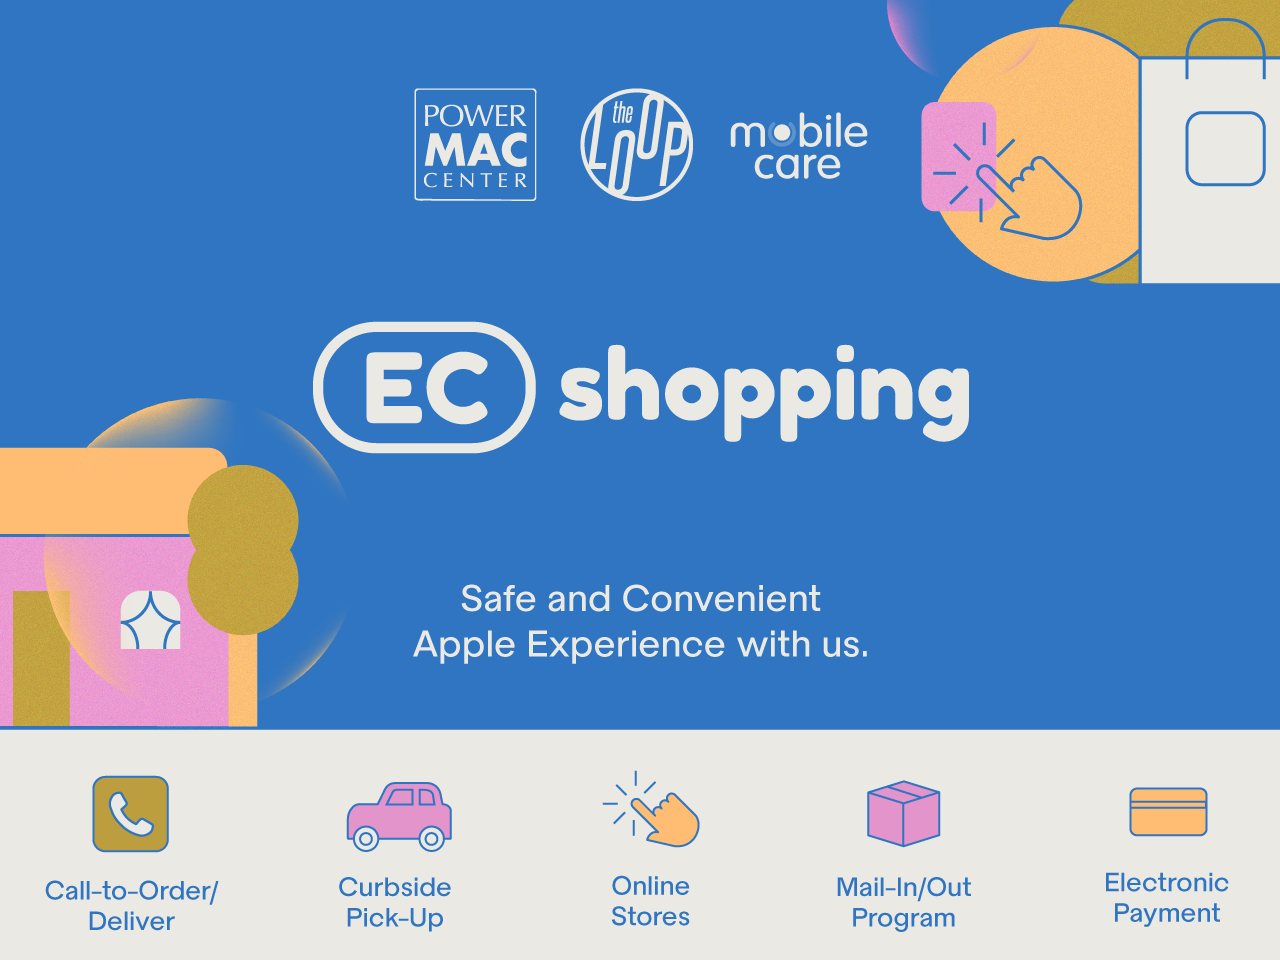 Stay safe while holiday shopping with Power Mac Center’s EC Shopping options